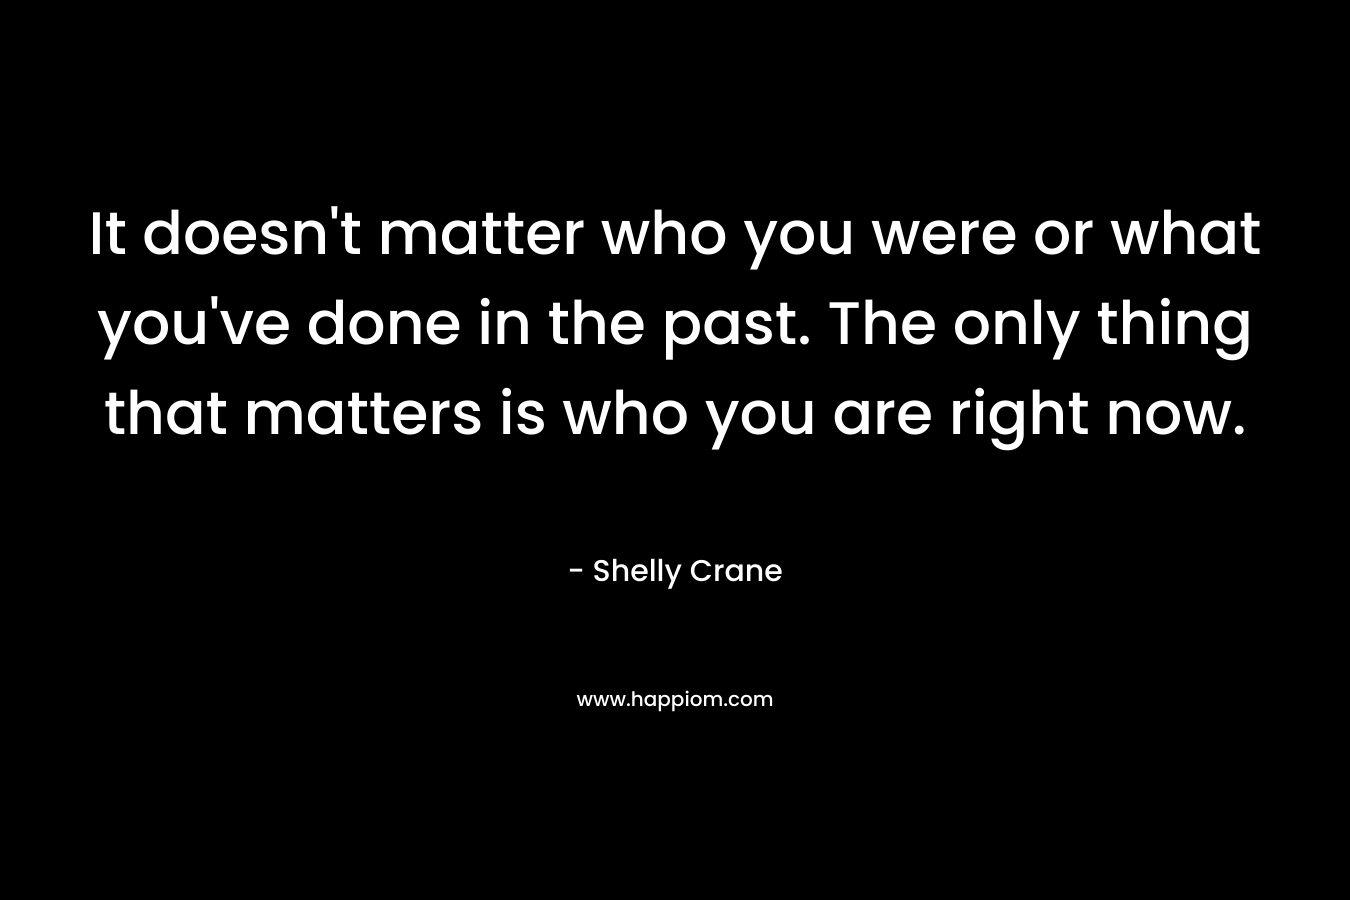 It doesn’t matter who you were or what you’ve done in the past. The only thing that matters is who you are right now. – Shelly Crane